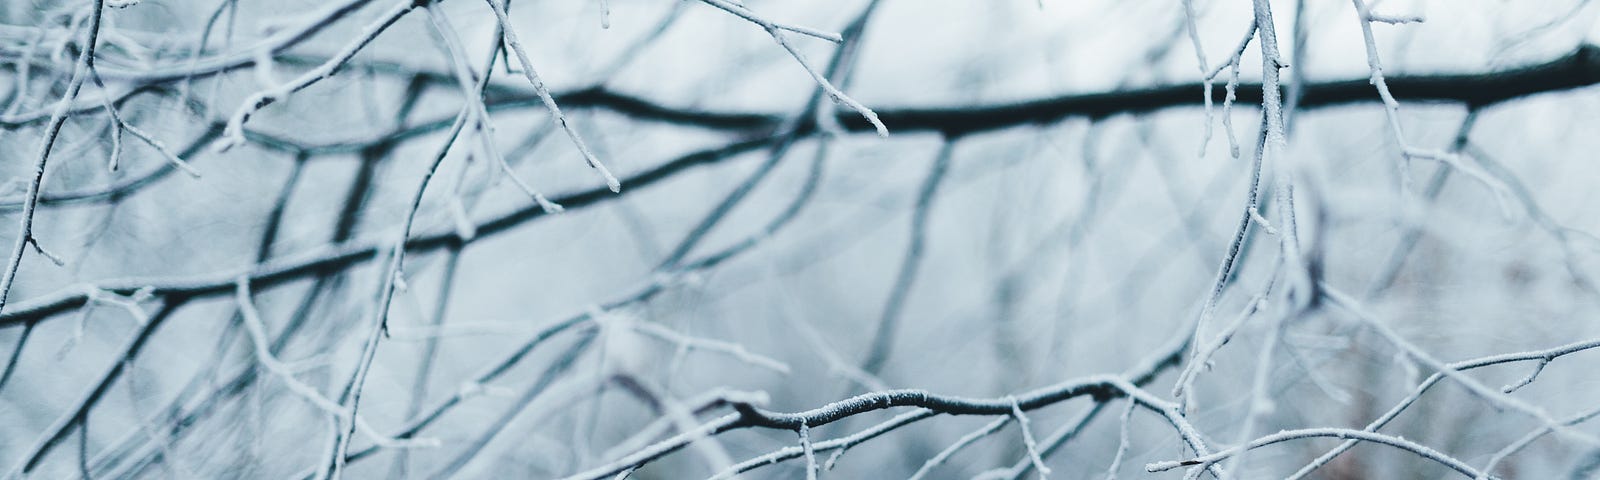 Tree branches encased in ice after a snow storm, against a backdrop of an overcast winter sky.